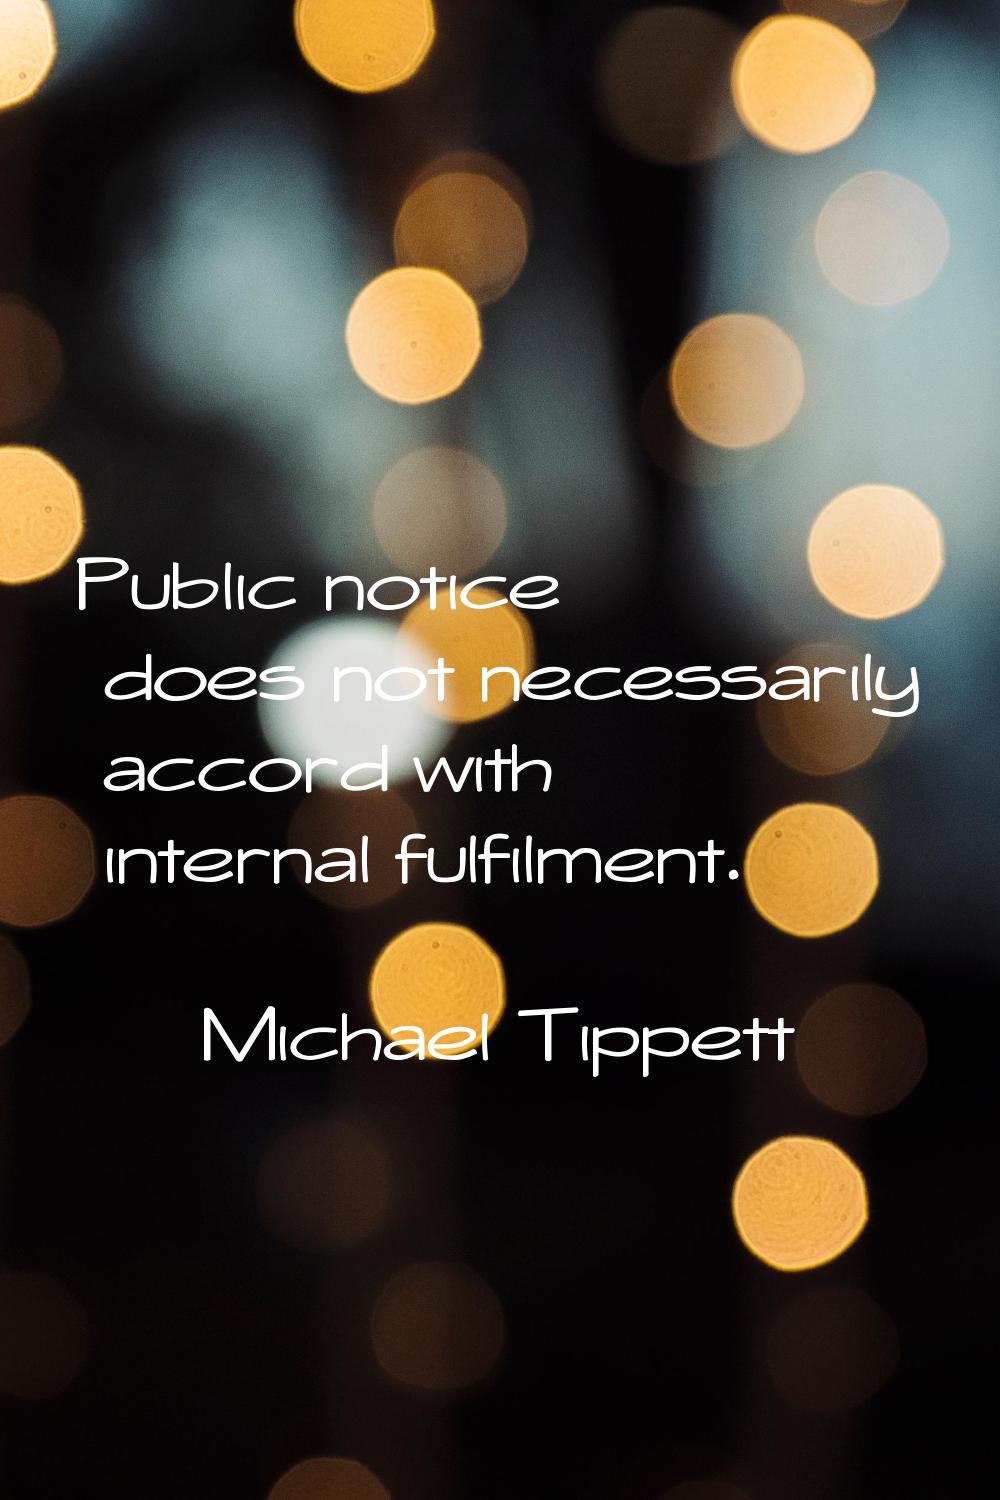 Public notice does not necessarily accord with internal fulfilment.